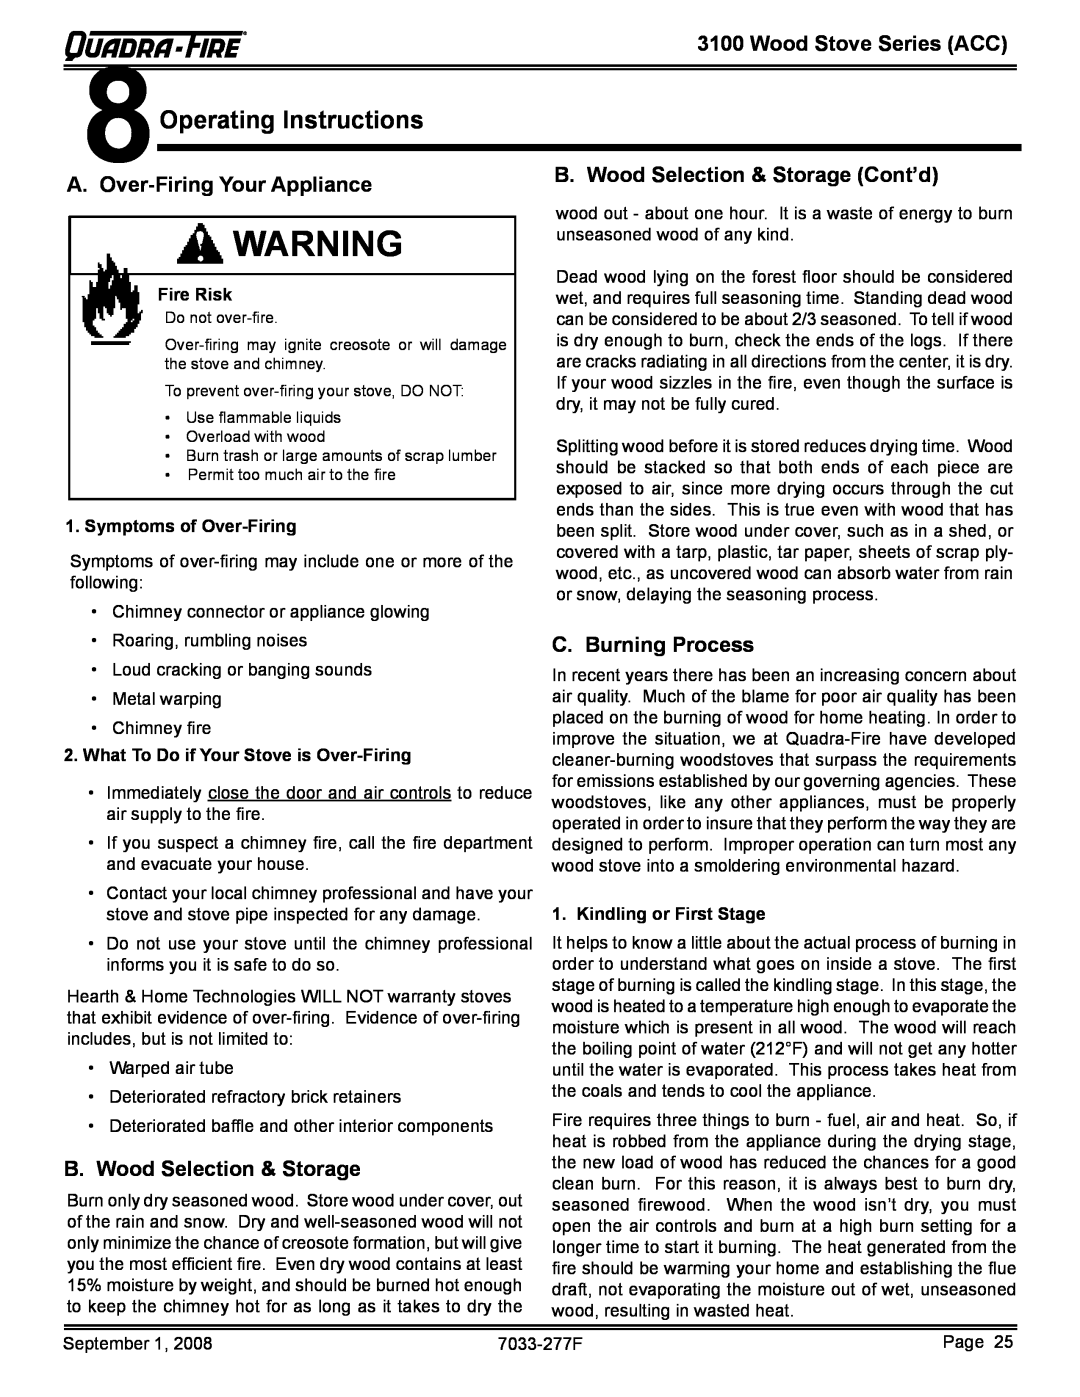 Hearth and Home Technologies 31M-ACC-MBK Operating Instructions, Over-Firing Your Appliance, B. Wood Selection & Storage 